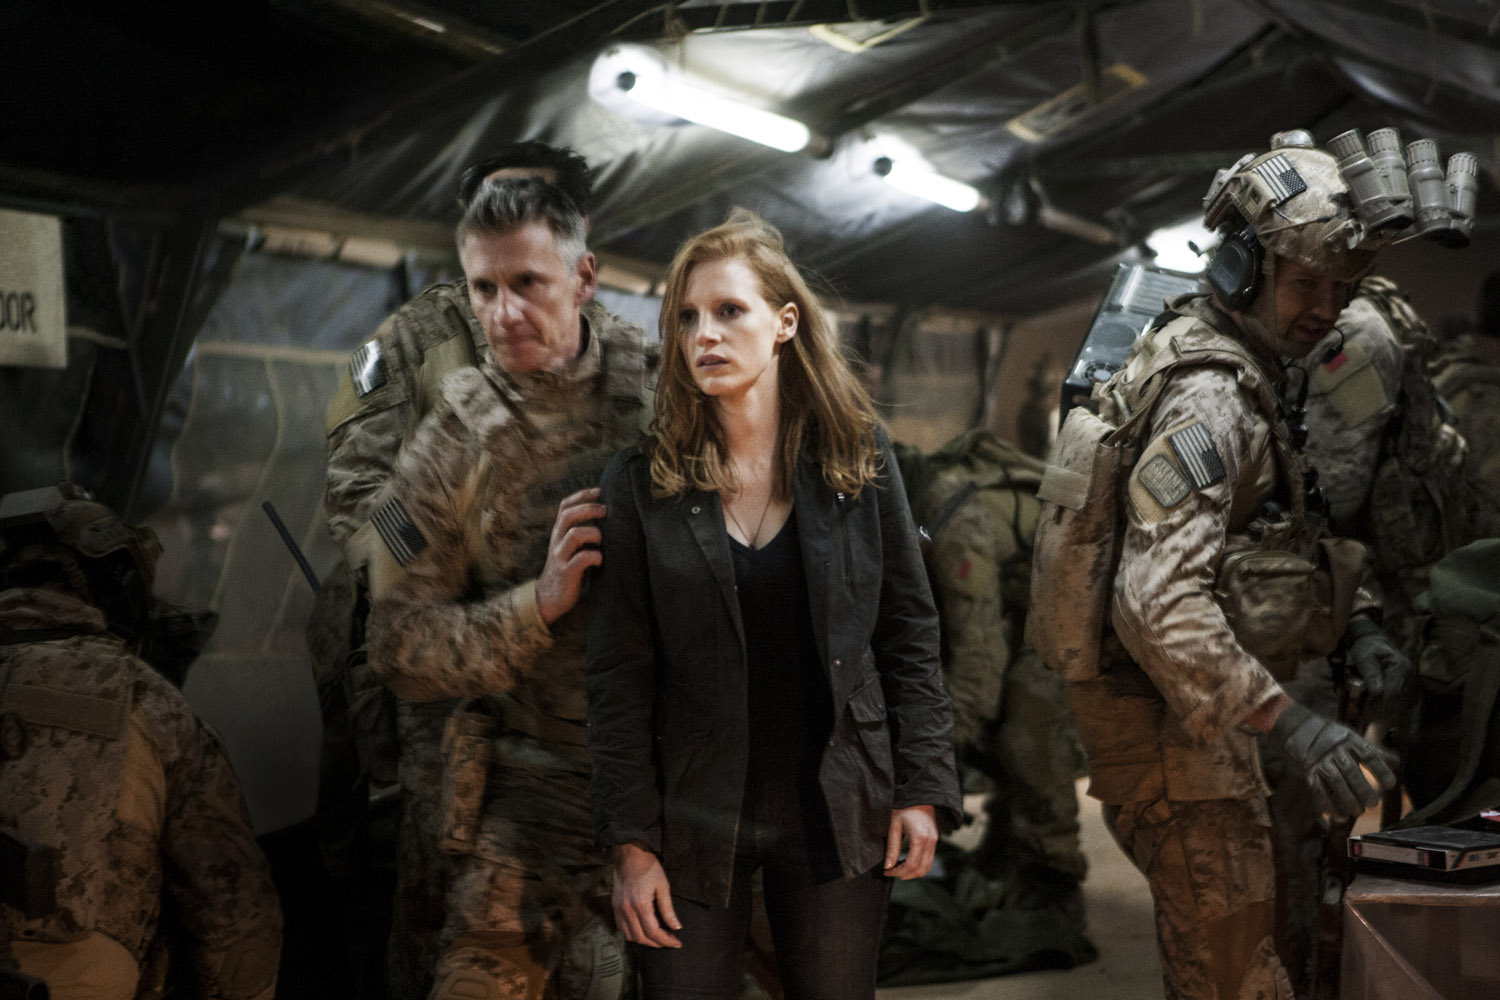 Stationed in a covert base overseas, Jessica Chastain (center) plays a member of the elite team of spies and military operatives (Christopher Stanley, LEFT and Alex Corbet Burcher, RIGHT) who secretly devoted themselves to finding Osama Bin Laden in Zero Dark Thirty.